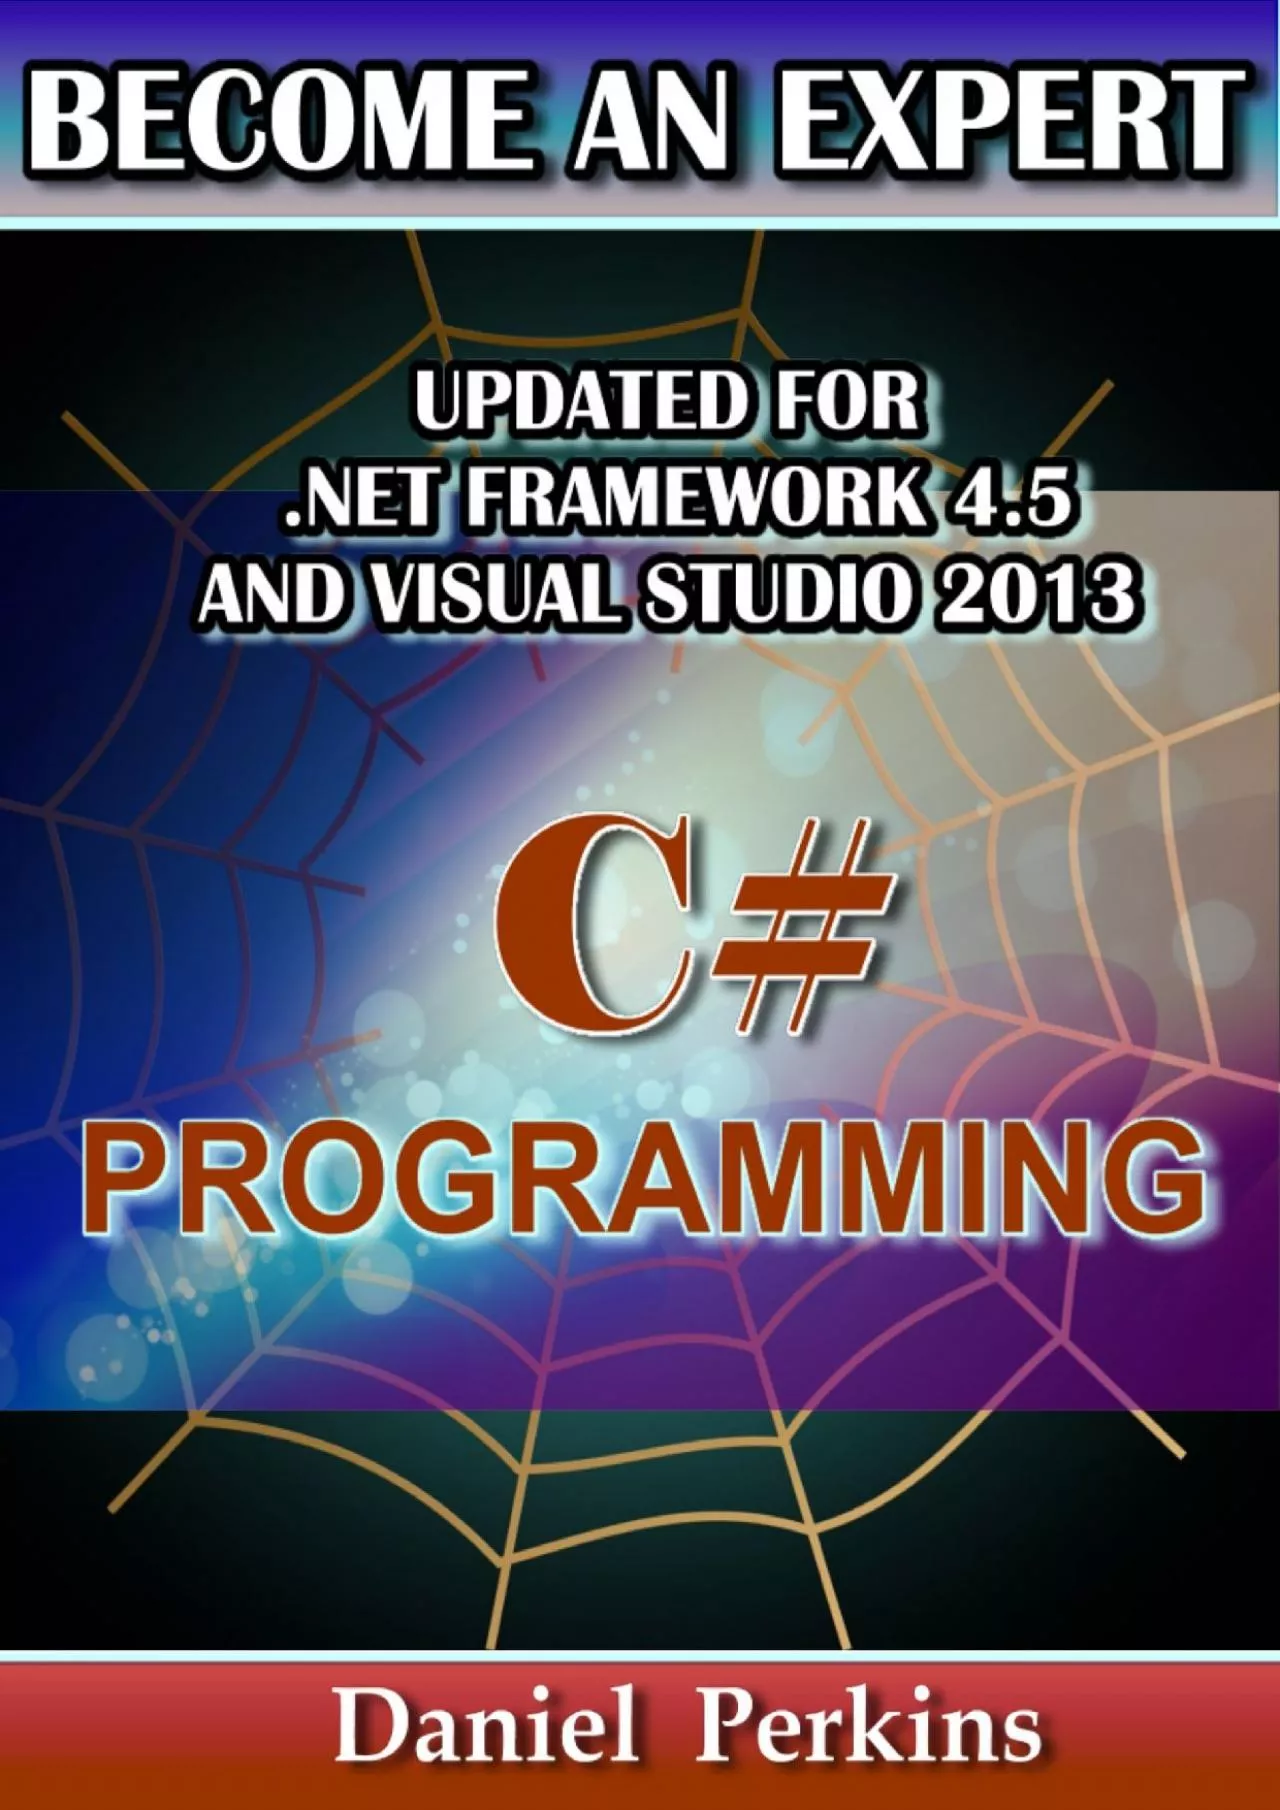 [PDF]-C Programming: UPDATED FOR .NET FRAMEWORK 4.5 and VISUAL STUDIO 2013 (BECOME AN